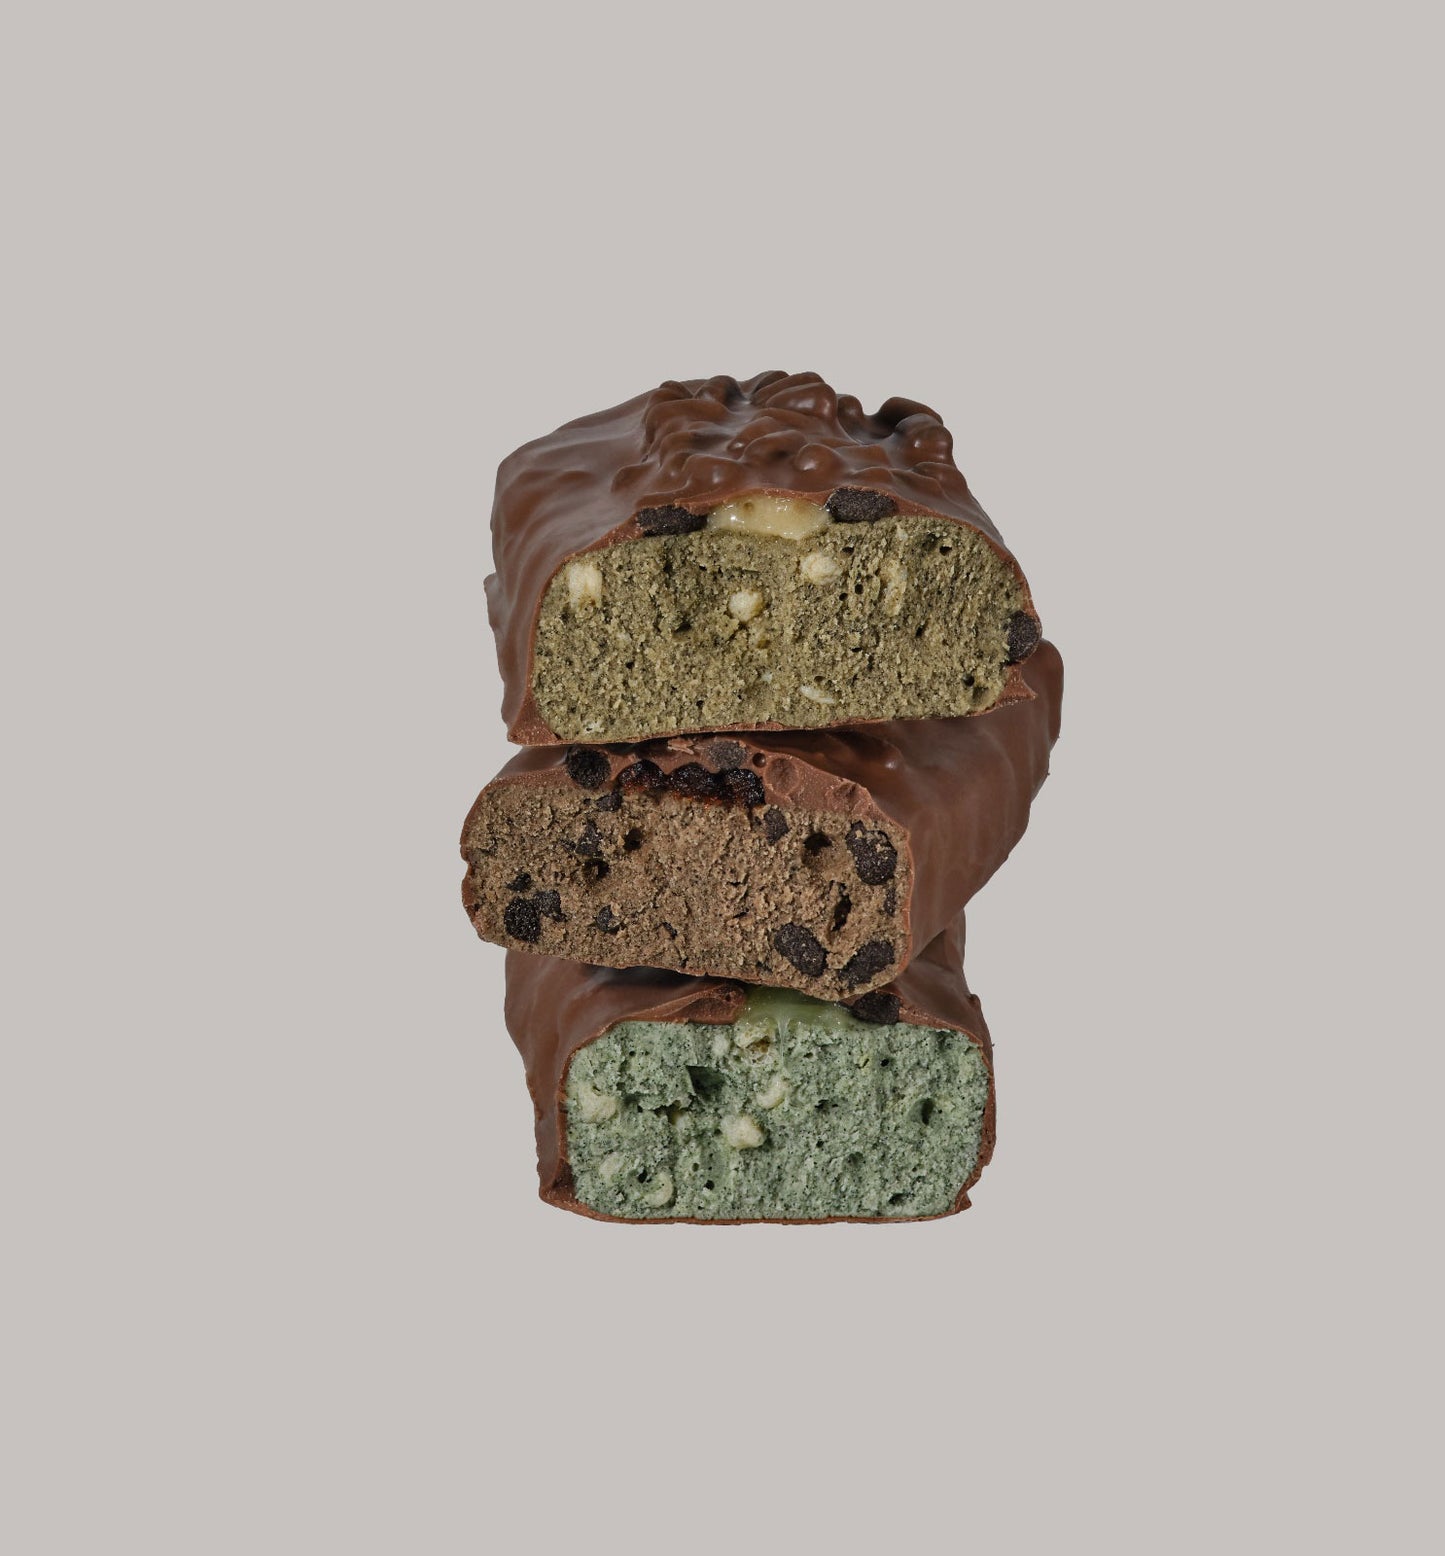 ERTHLY - Pistachio (Pack of 3)